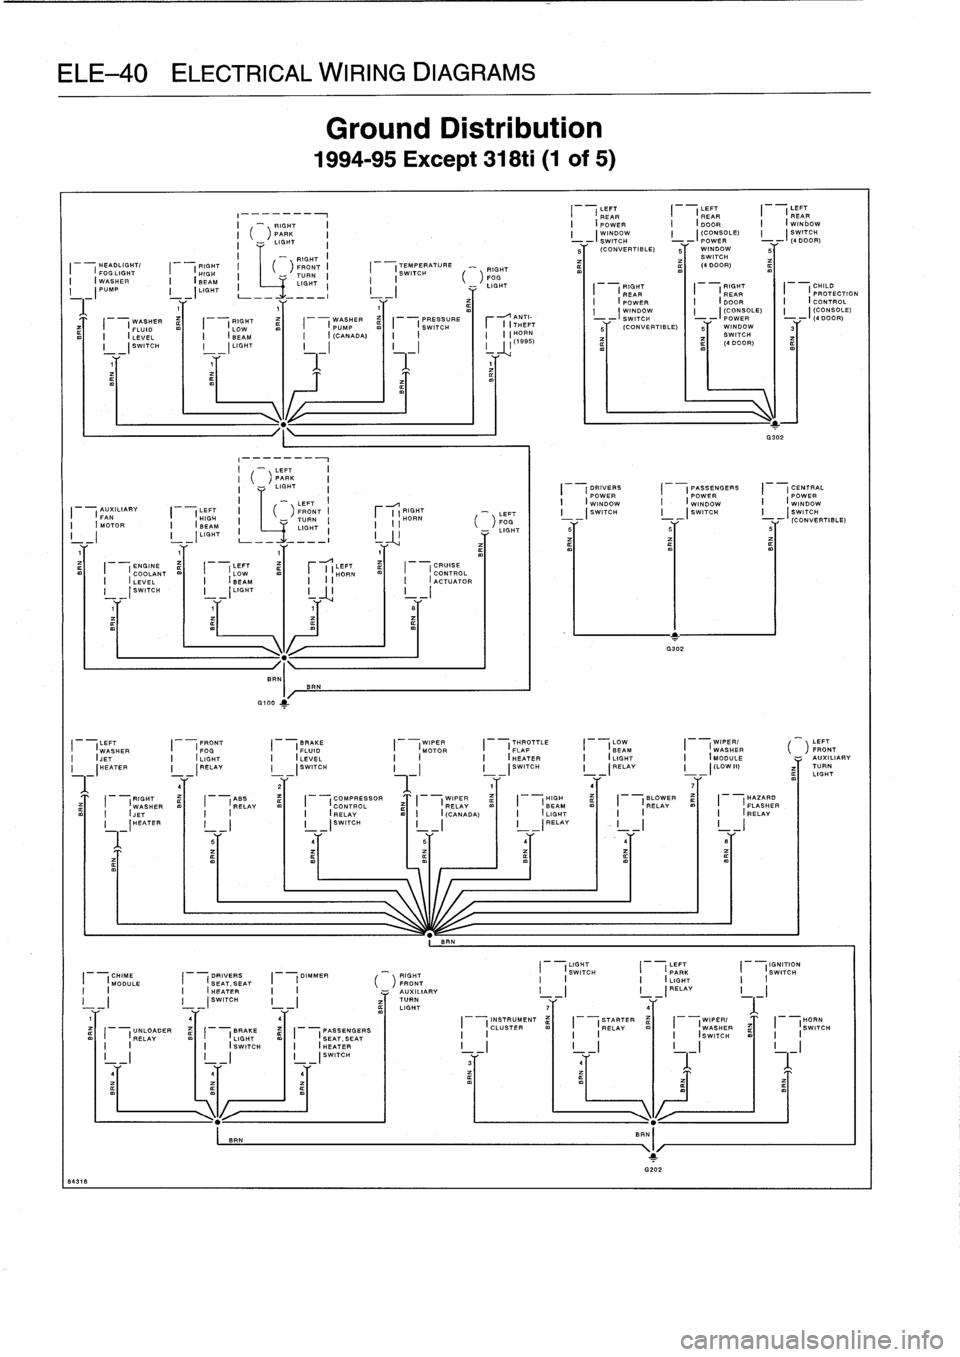 BMW 318i 1996 E36 Workshop Manual 
ELE-40
ELECTRICAL
WIRING
DIAGRAMS

RIGHTHEADLIGHT/

	

RIGHT
I

	

FRONT
I

	

FOG
LIGHT

	

I

	

HIGH

	

I

	

TURN
I

	

I
WASHER

	

I

	

I
BEAM

	

LIGHT
I
(PUMP

	

I
(LIGHT
,
L-
1

	

1

	

